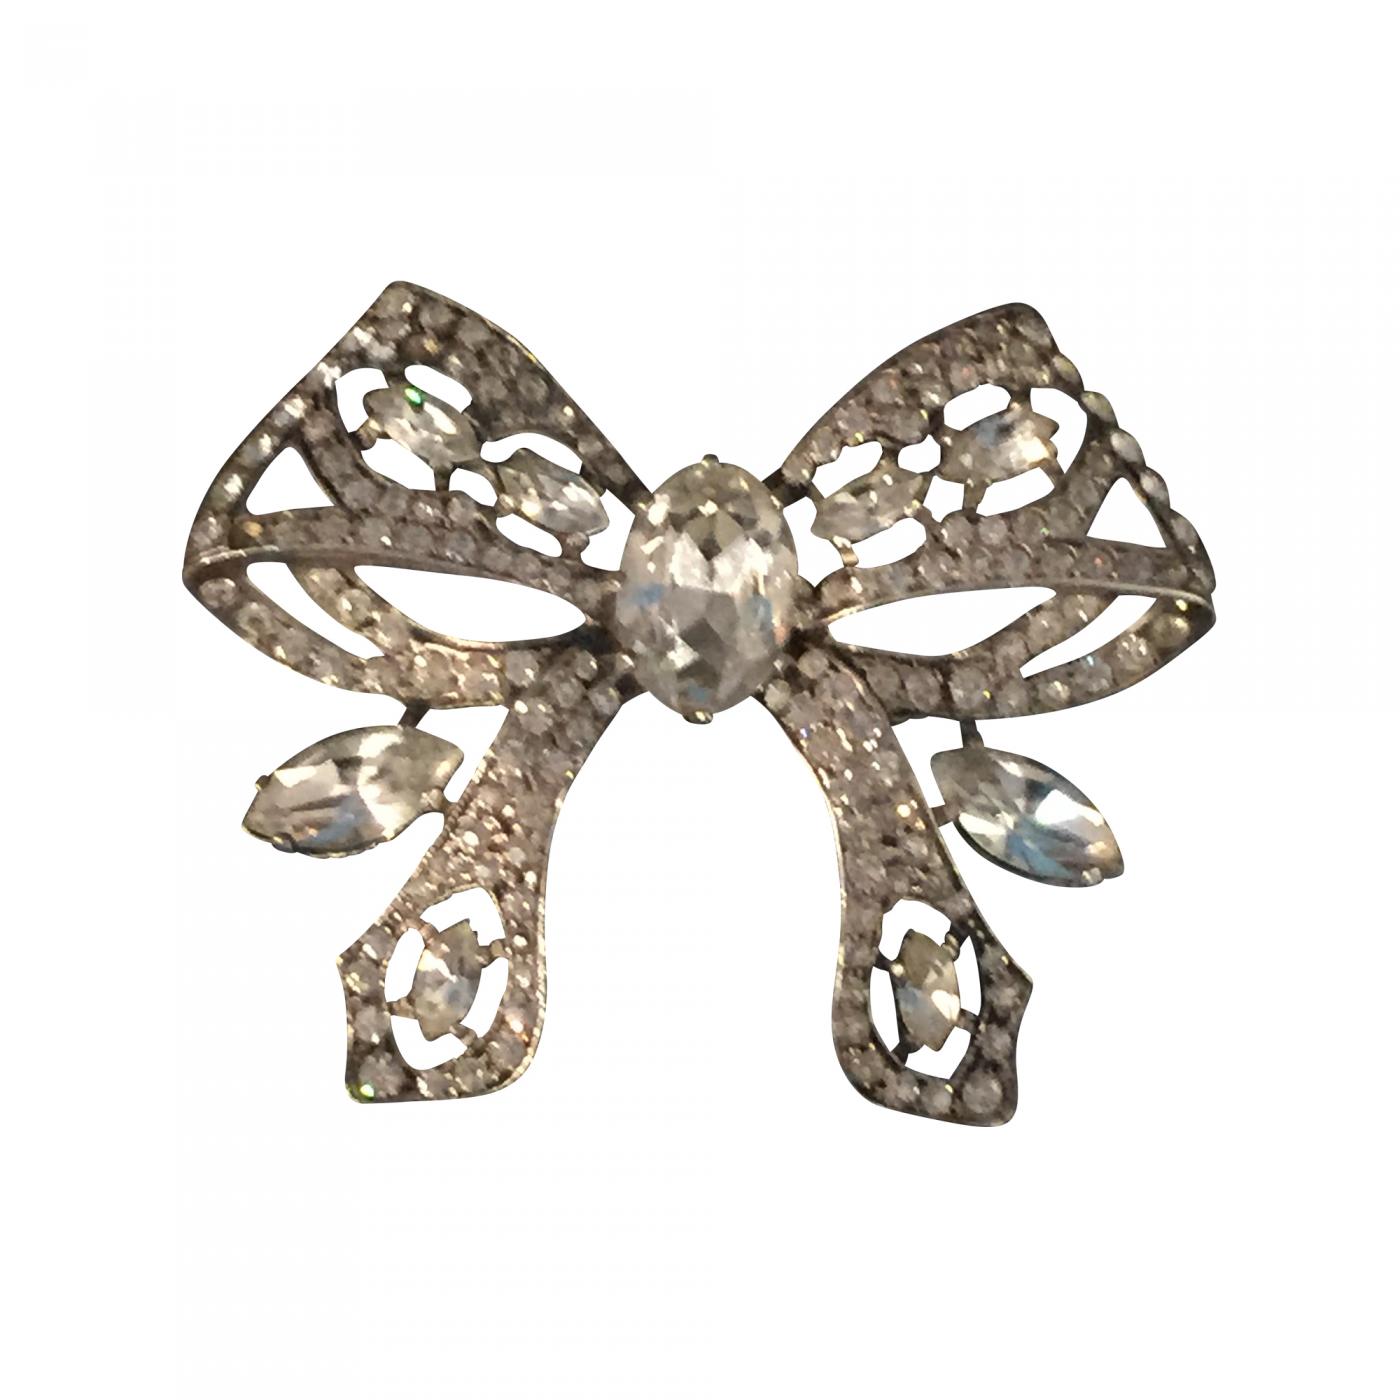 A GORGEOUS Vintage Brooch, Art Deco Design Dating to the 1940's